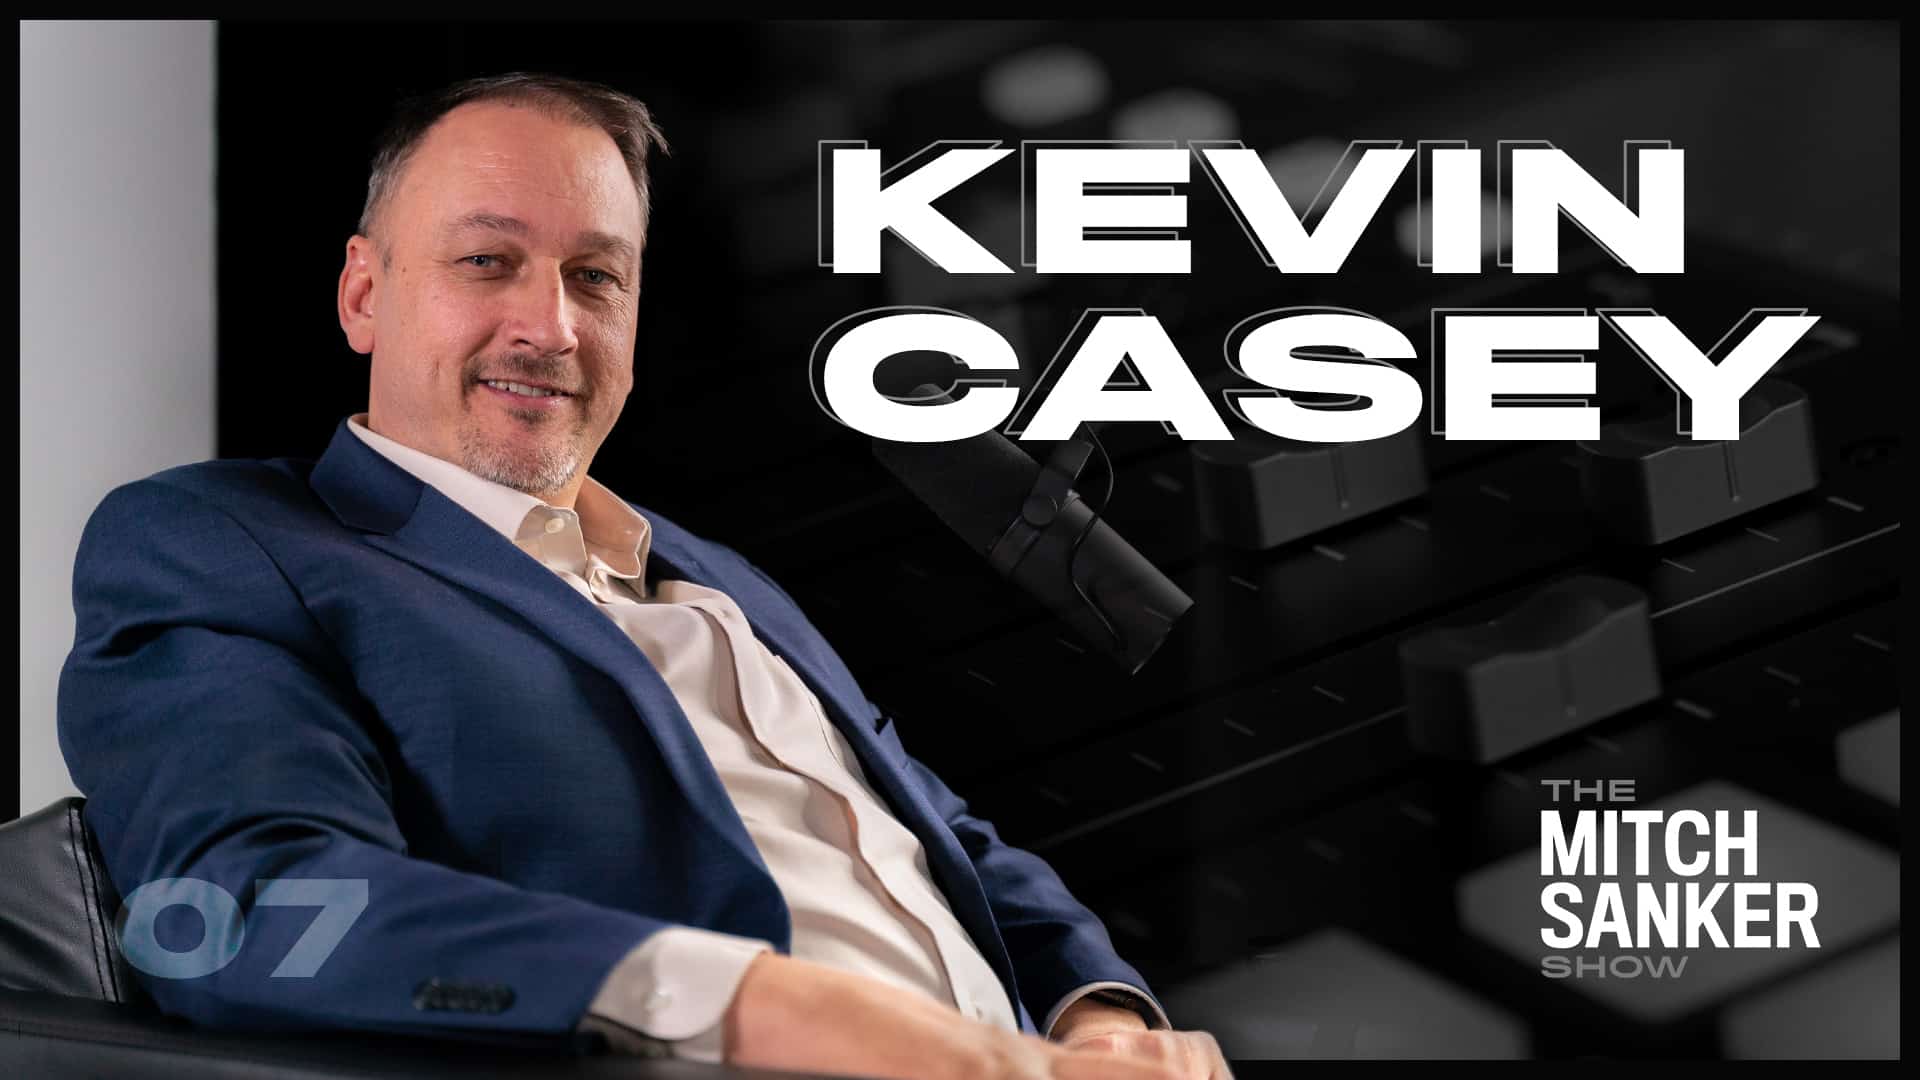 You are currently viewing The Mitch Sanker Show – Episode 07 featuring Kevin Casey